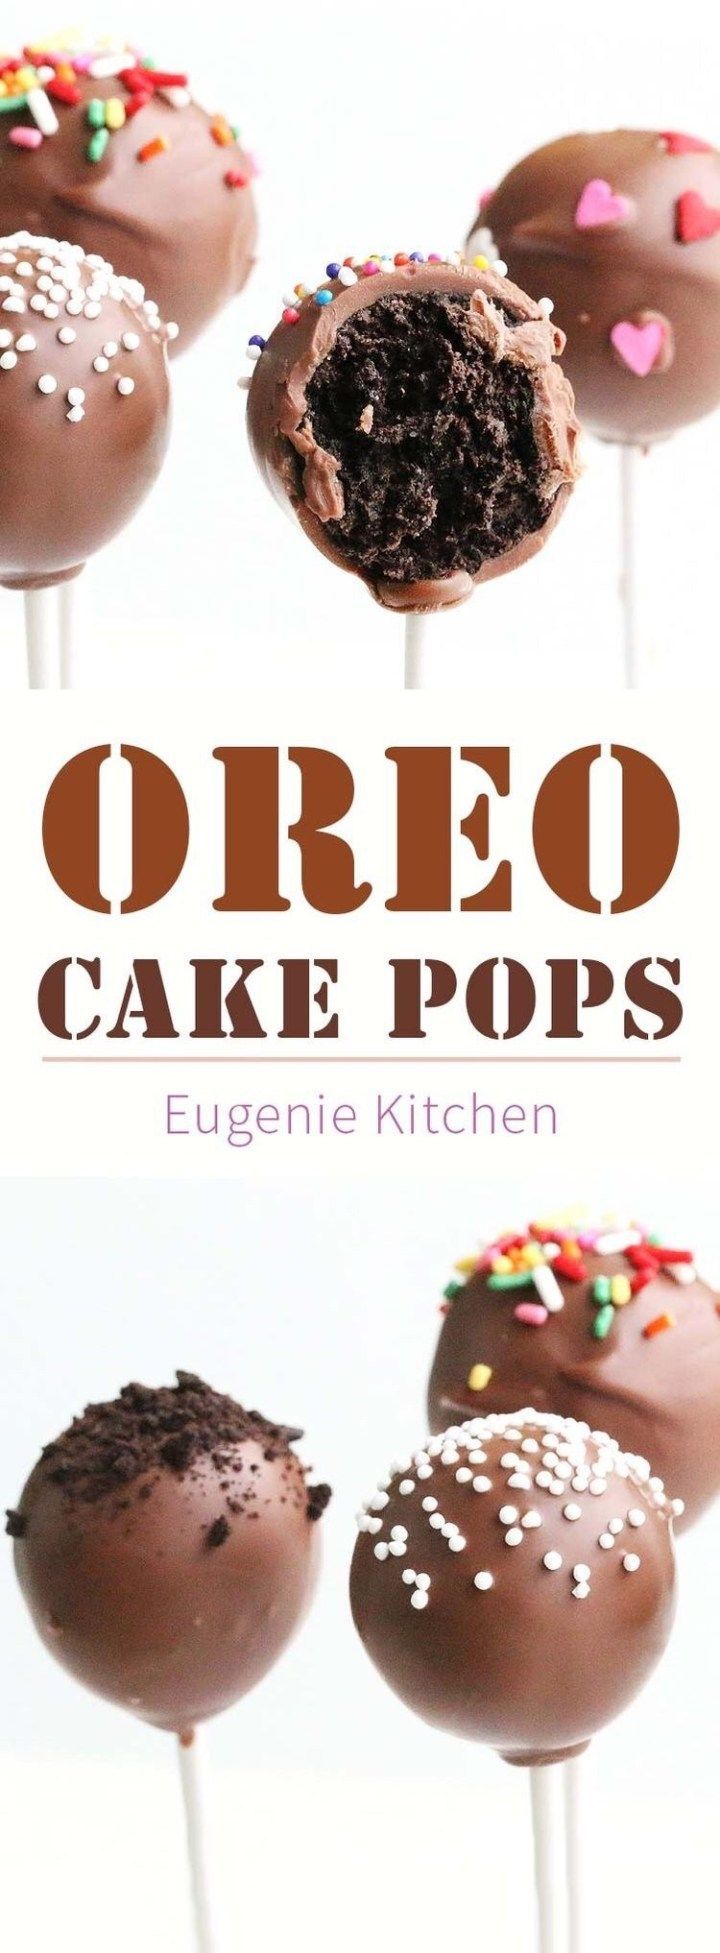 34 Cake Pop Recipes You'll Fall In Love With -   15 cake Pops popcakes ideas